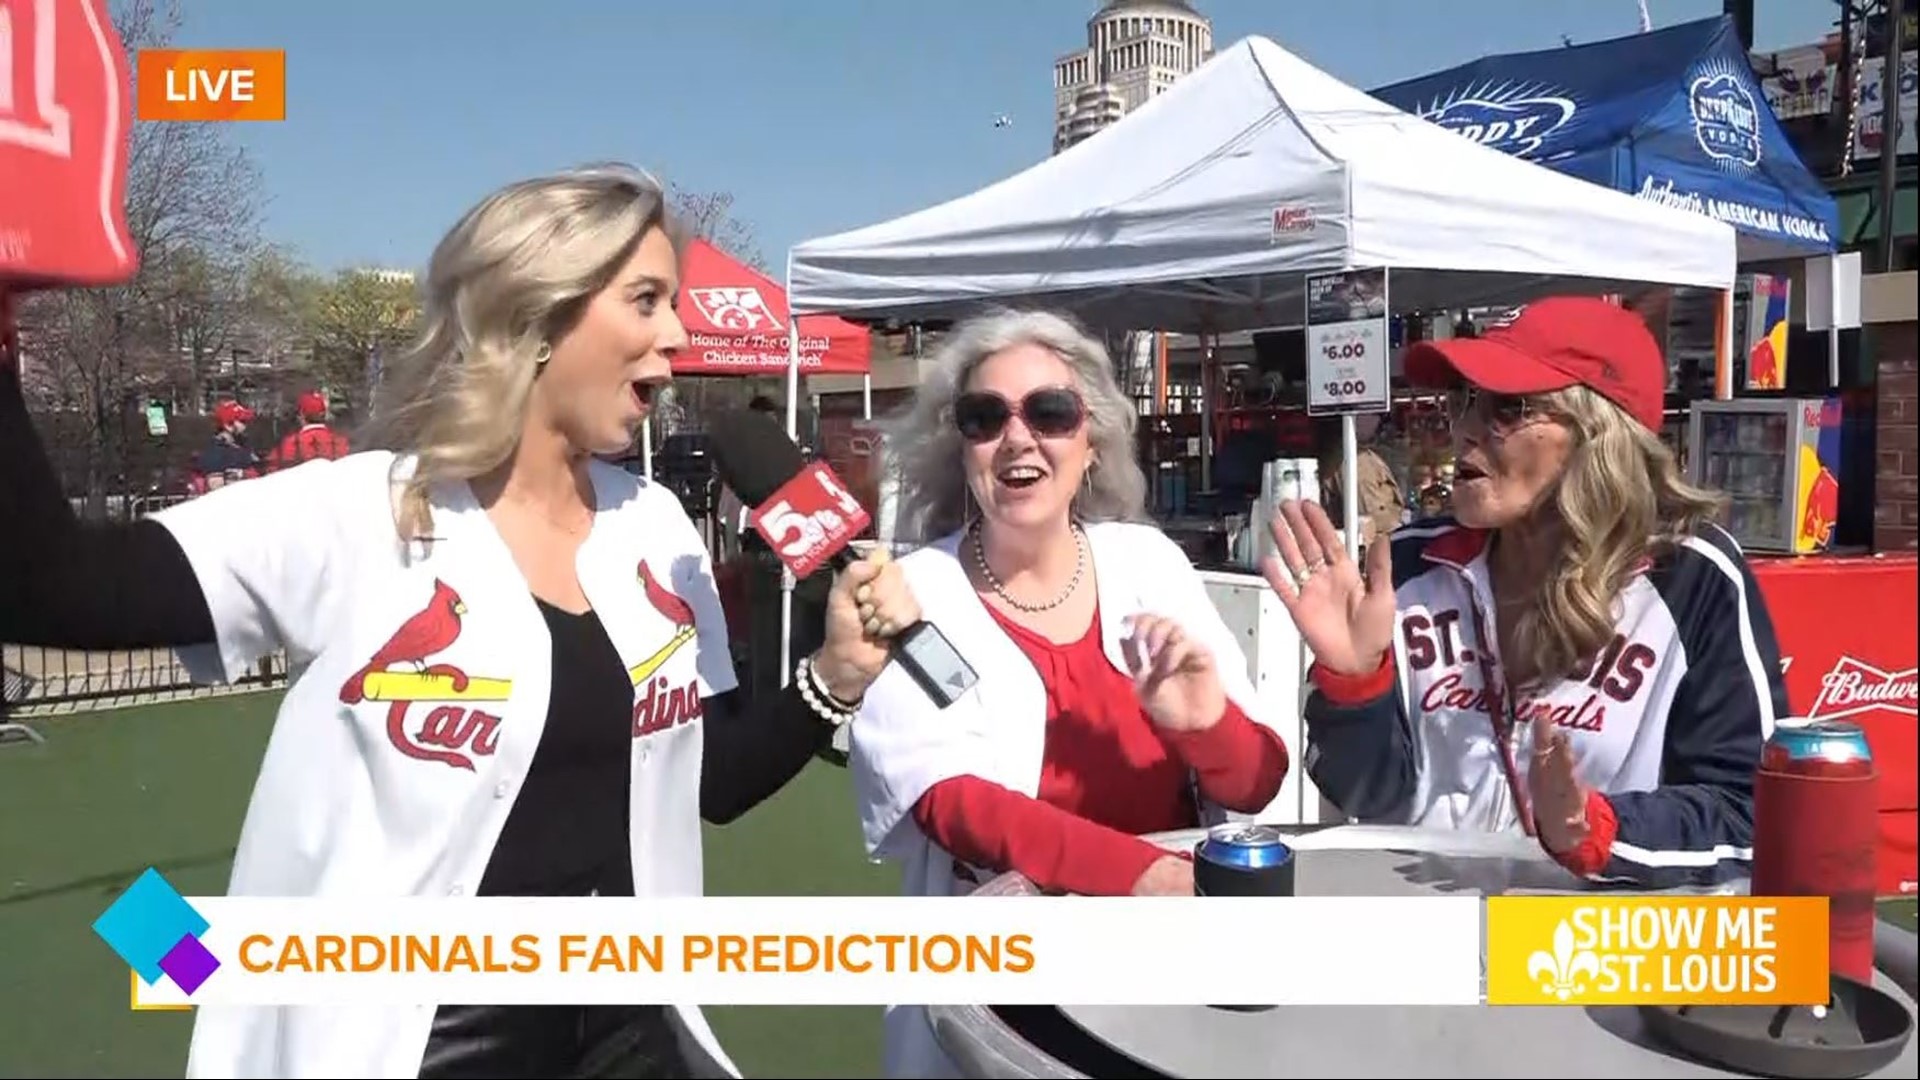 Mary talks with dedicated fans about their score prediction and Malik chats with Dusty about the Opening Day activities